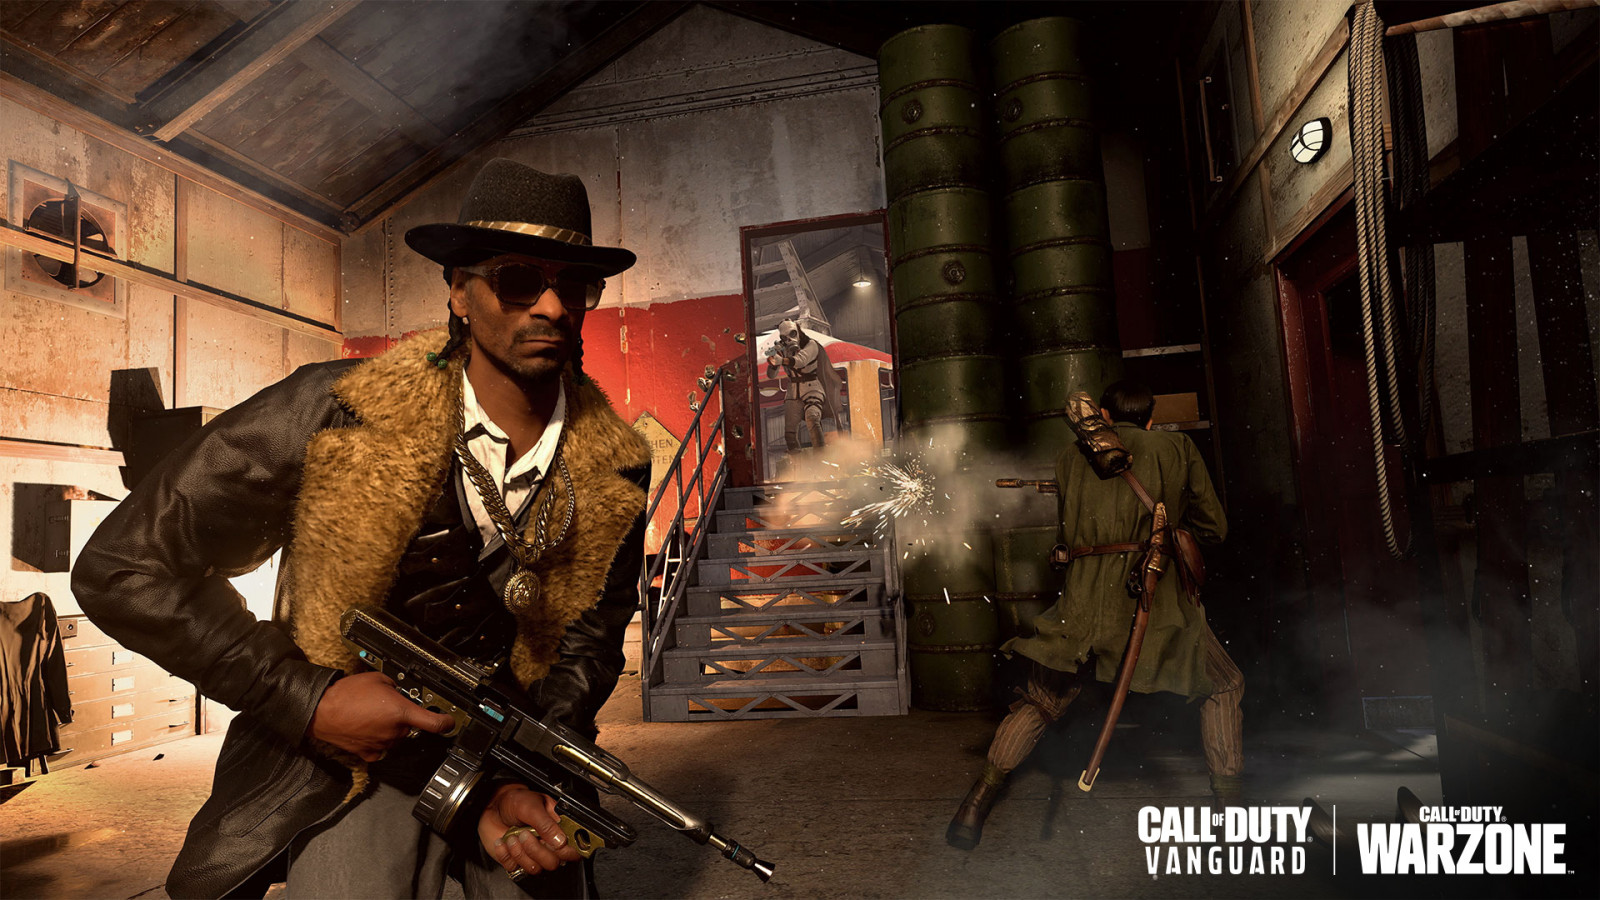 Cover image for You can play Snoop Dogg in Call of Duty, but you can’t PLAY him